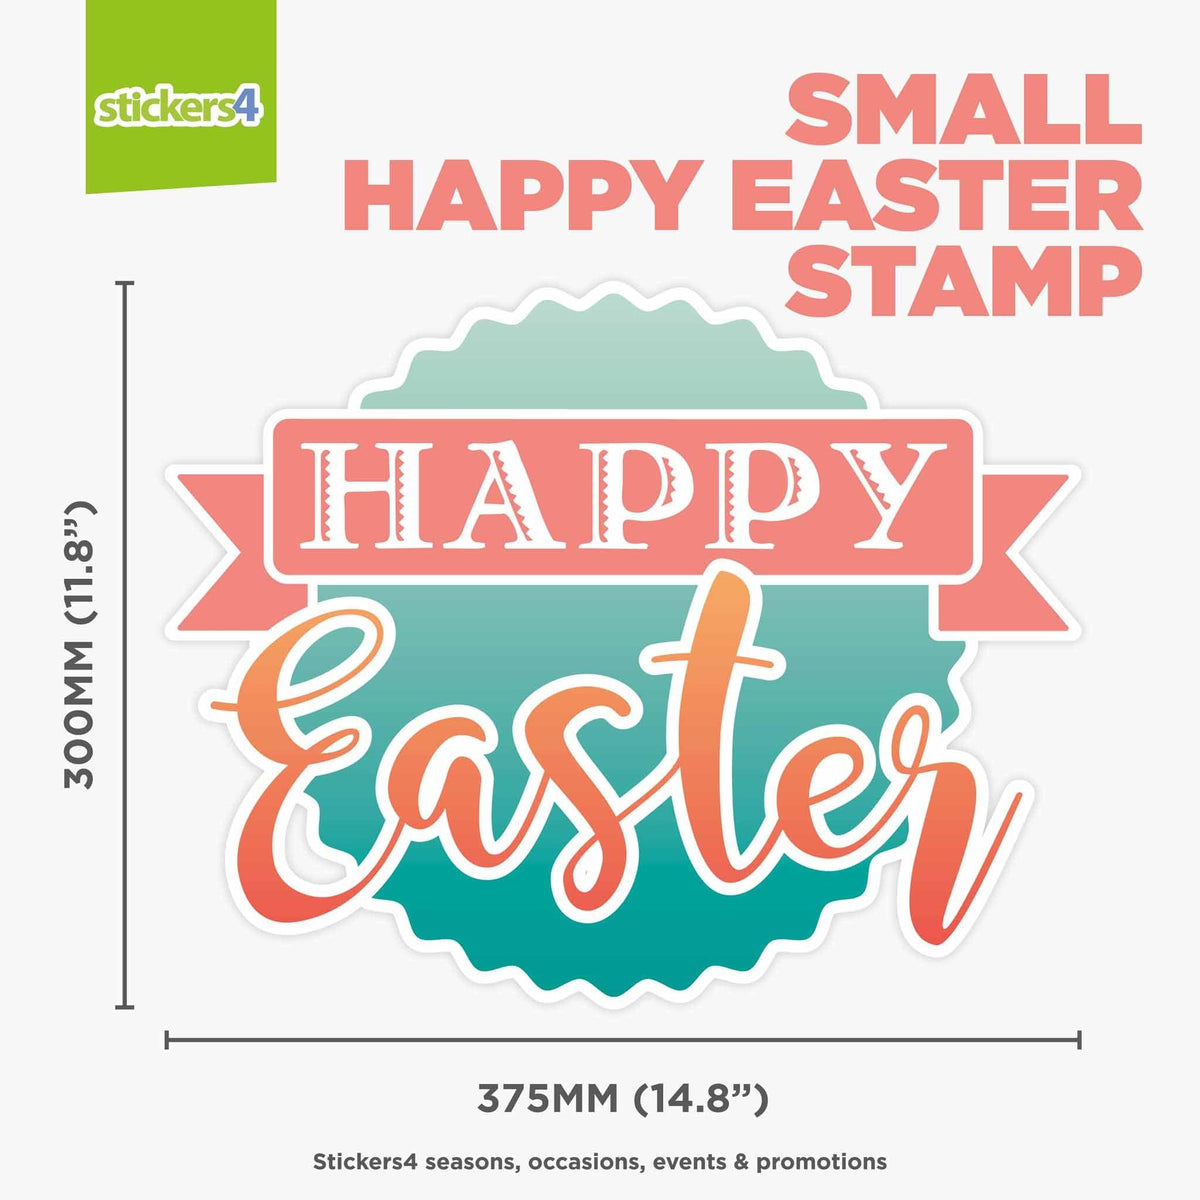 Happy Easter Stamp Static Cling Window Sticker